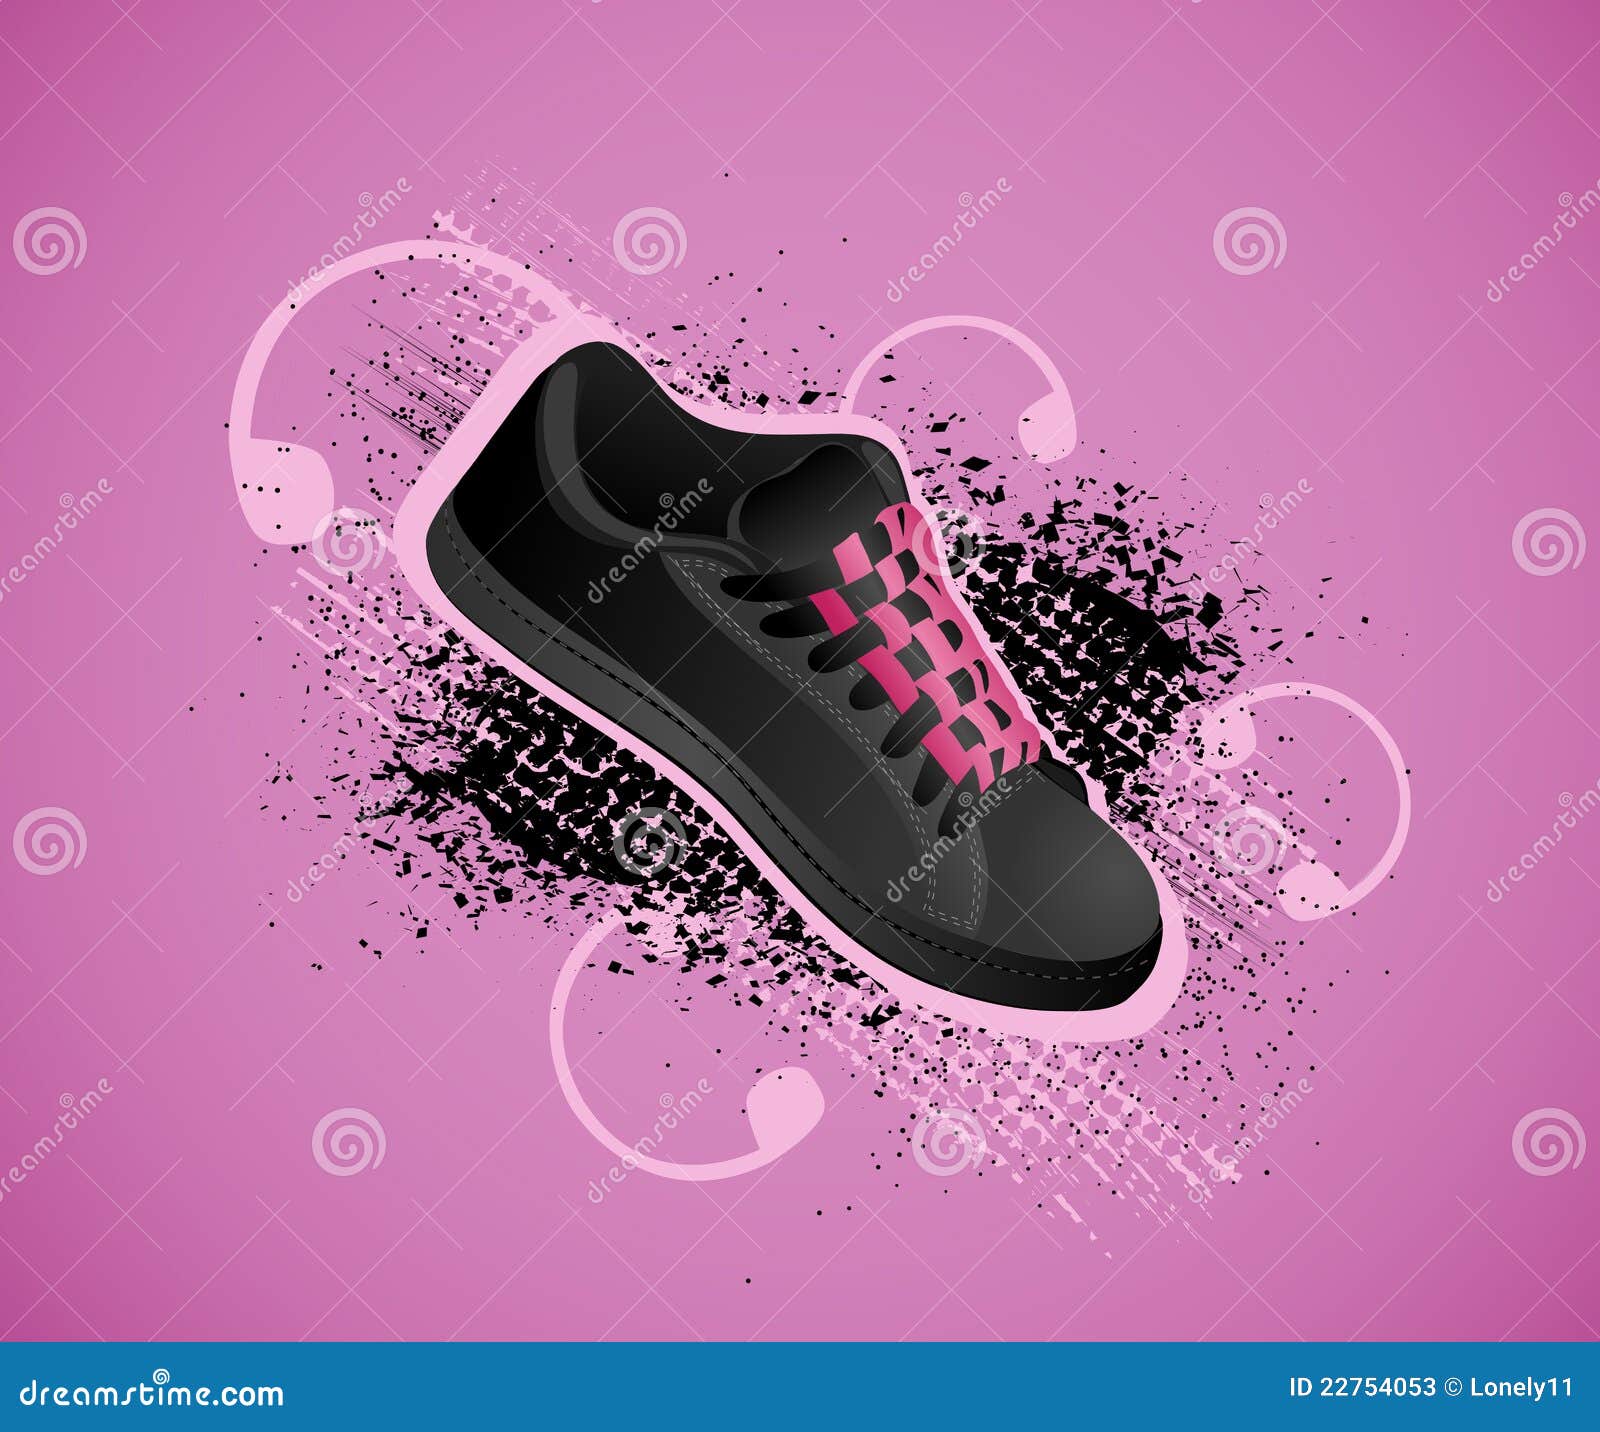 Stock Background   gym With Shoes Gym 22754053  shoes Photos for Image: